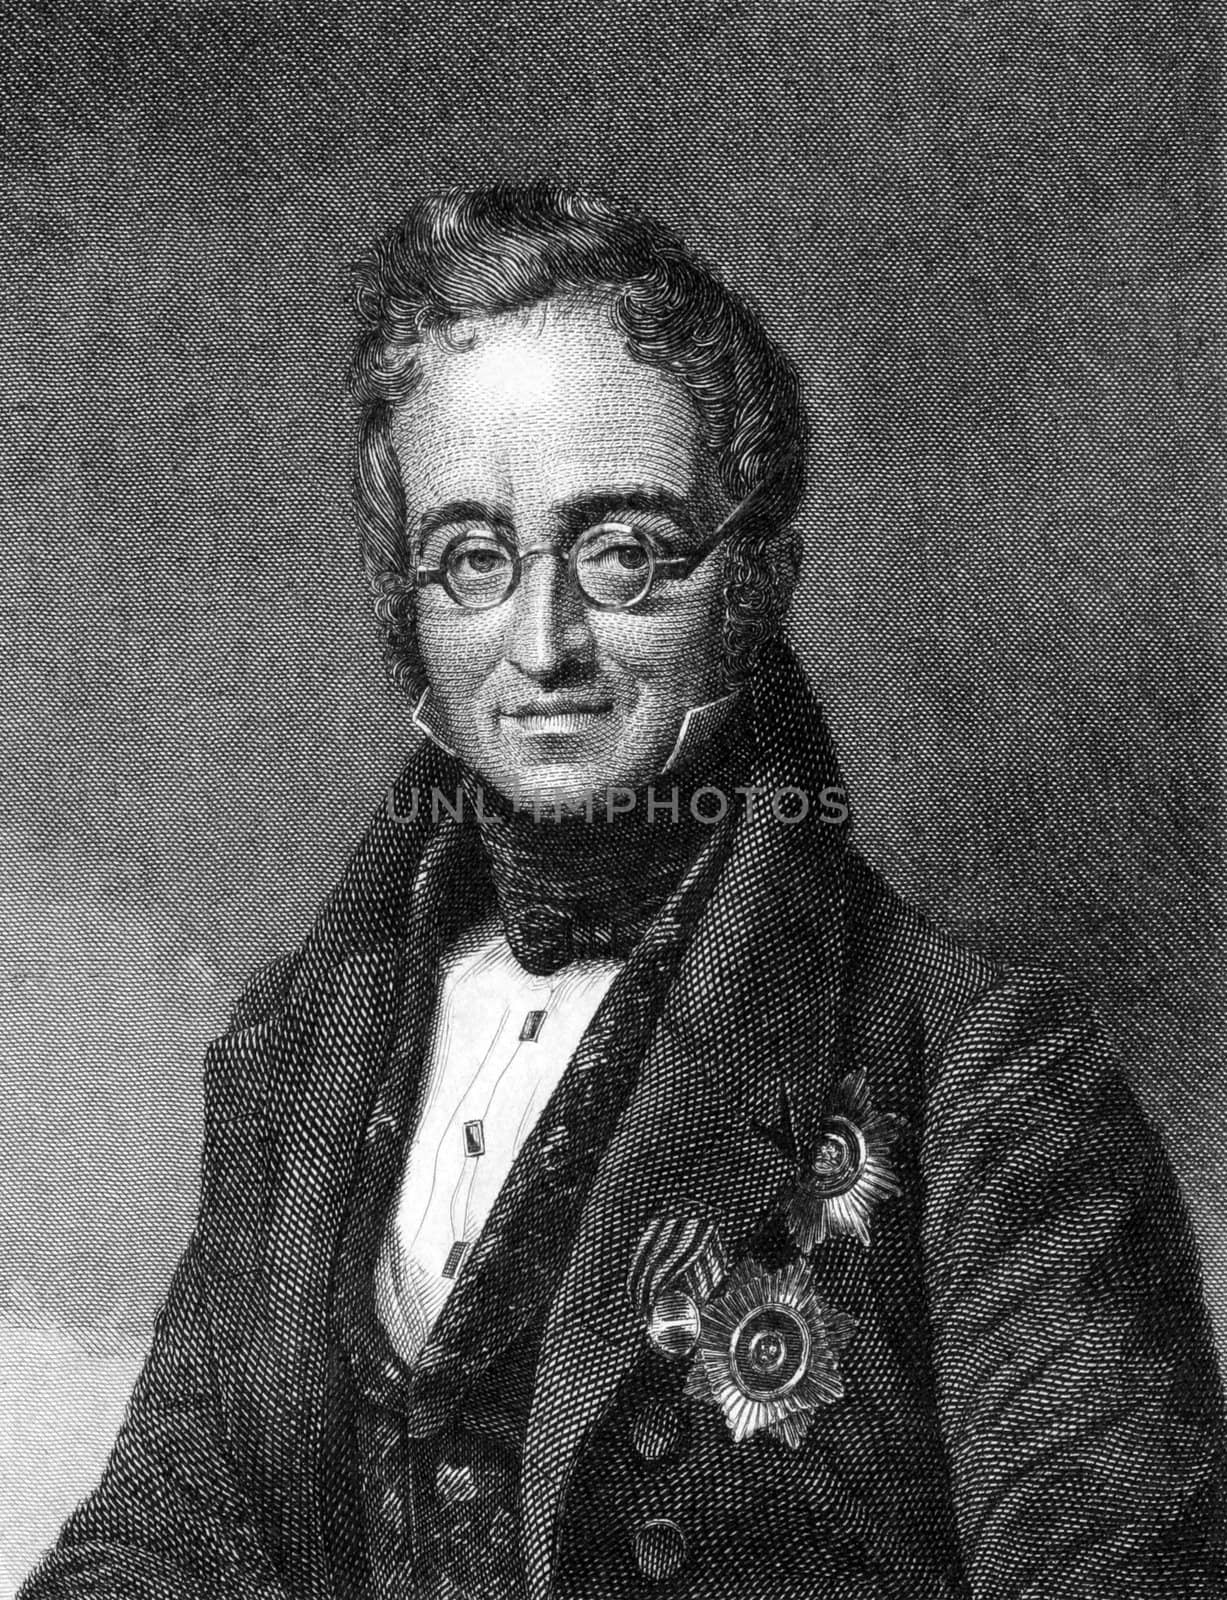 Karl Nesselrode (1780-1862) on engraving from 1859.  Russian diplomat and a leading European conservative statesman of the Holy Alliance. Engraved by F.Lehmann and published in Meyers Konversations-Lexikon, Germany,1859.